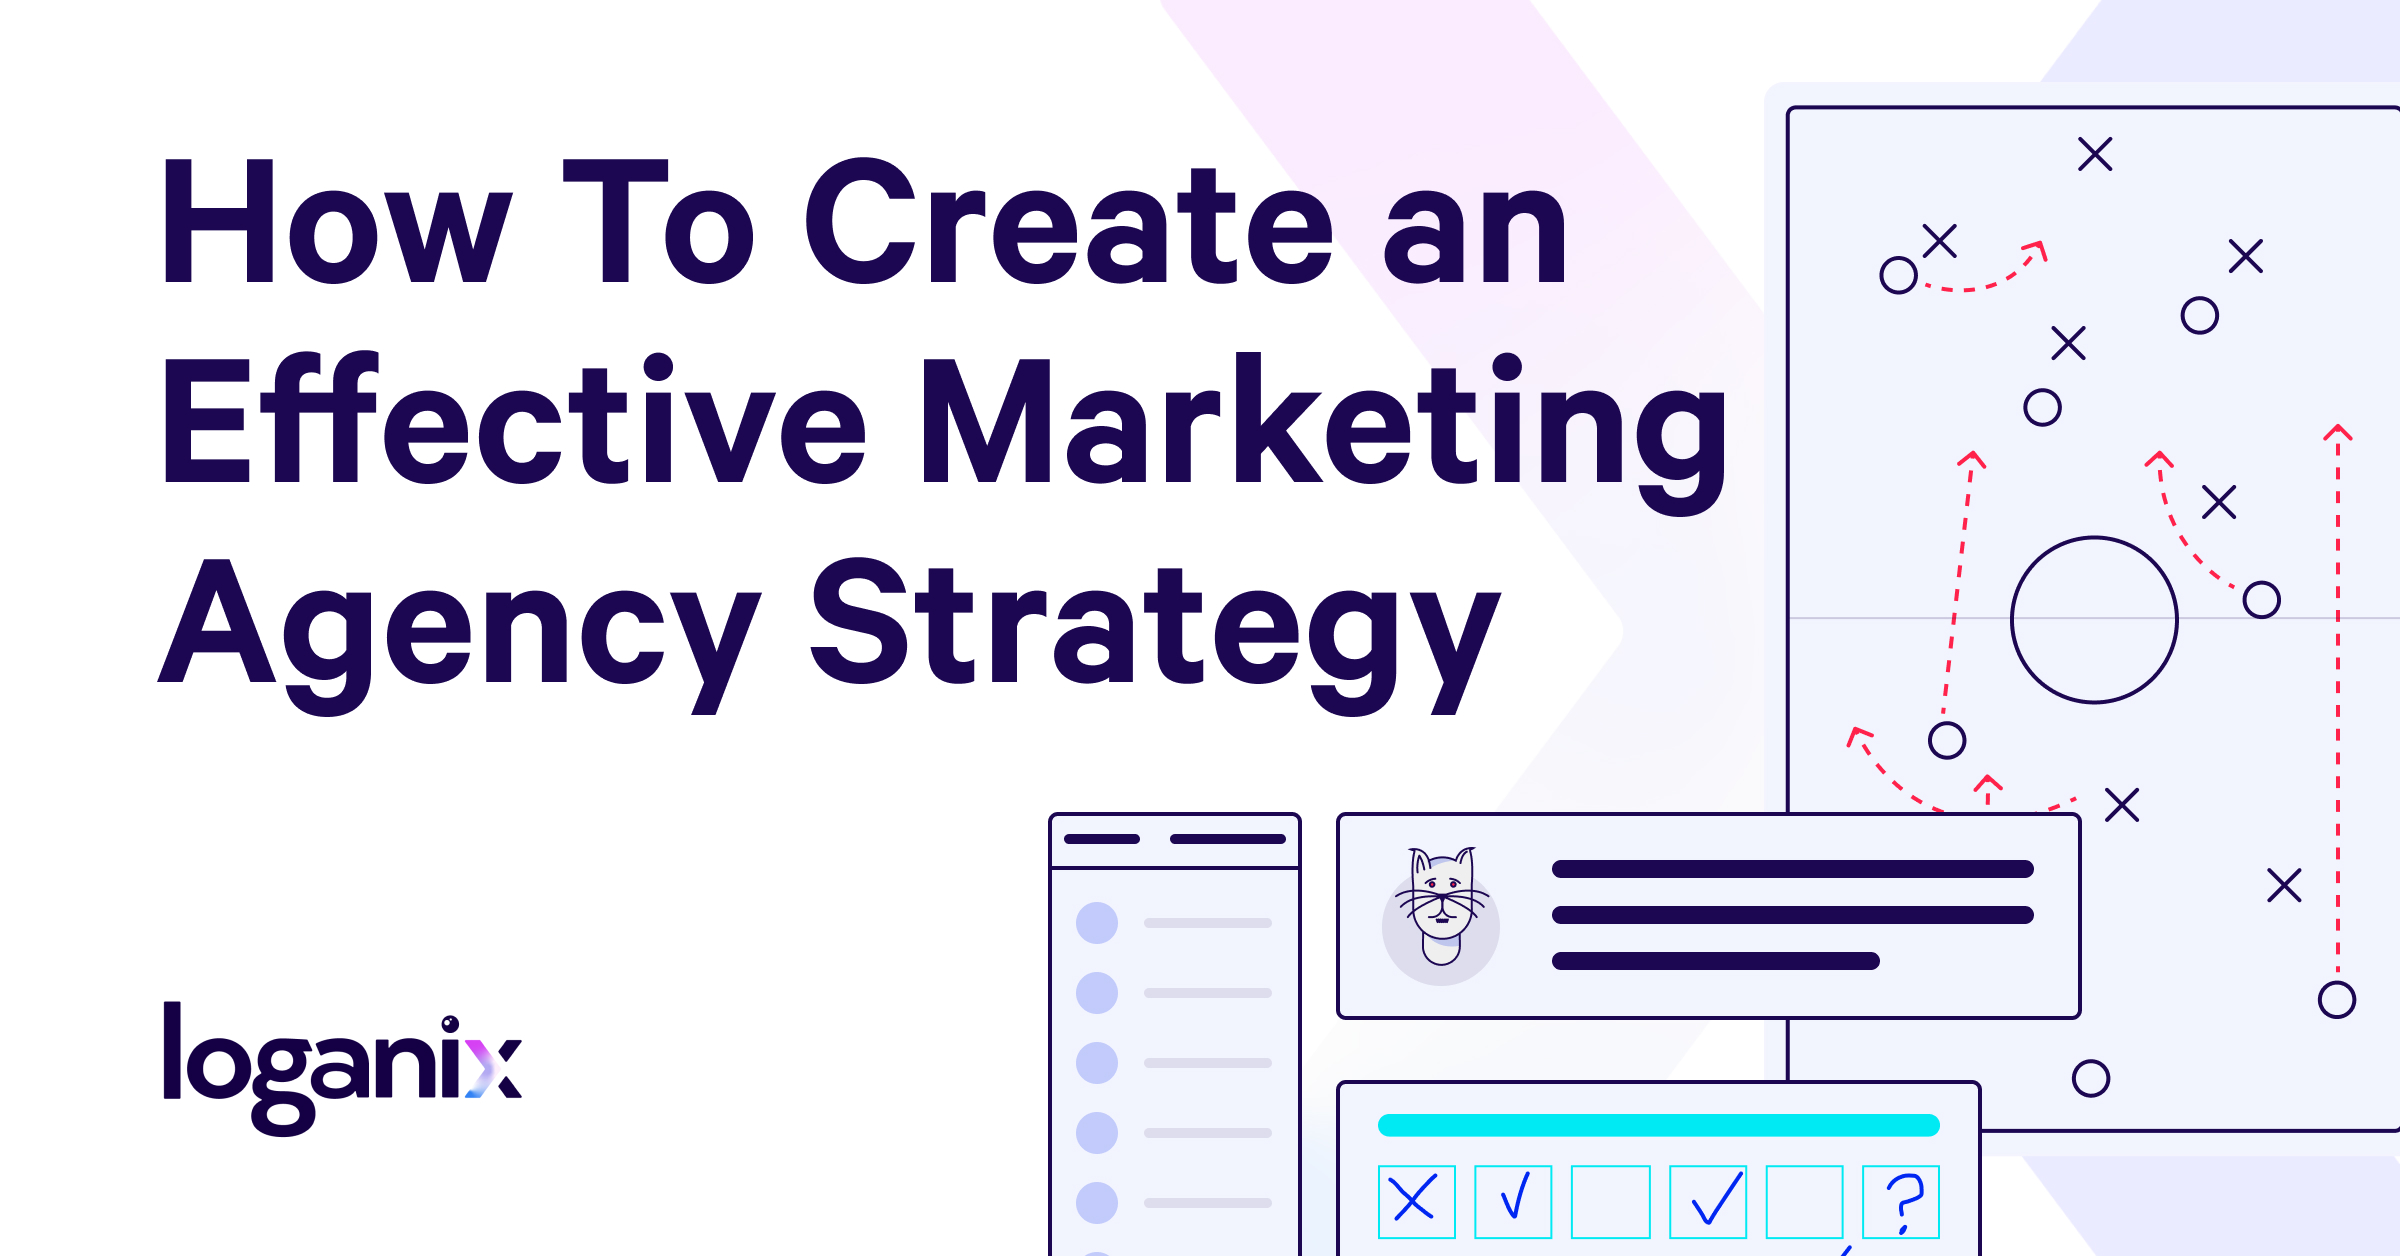 How to Create an Effective Marketing Agency Strategy